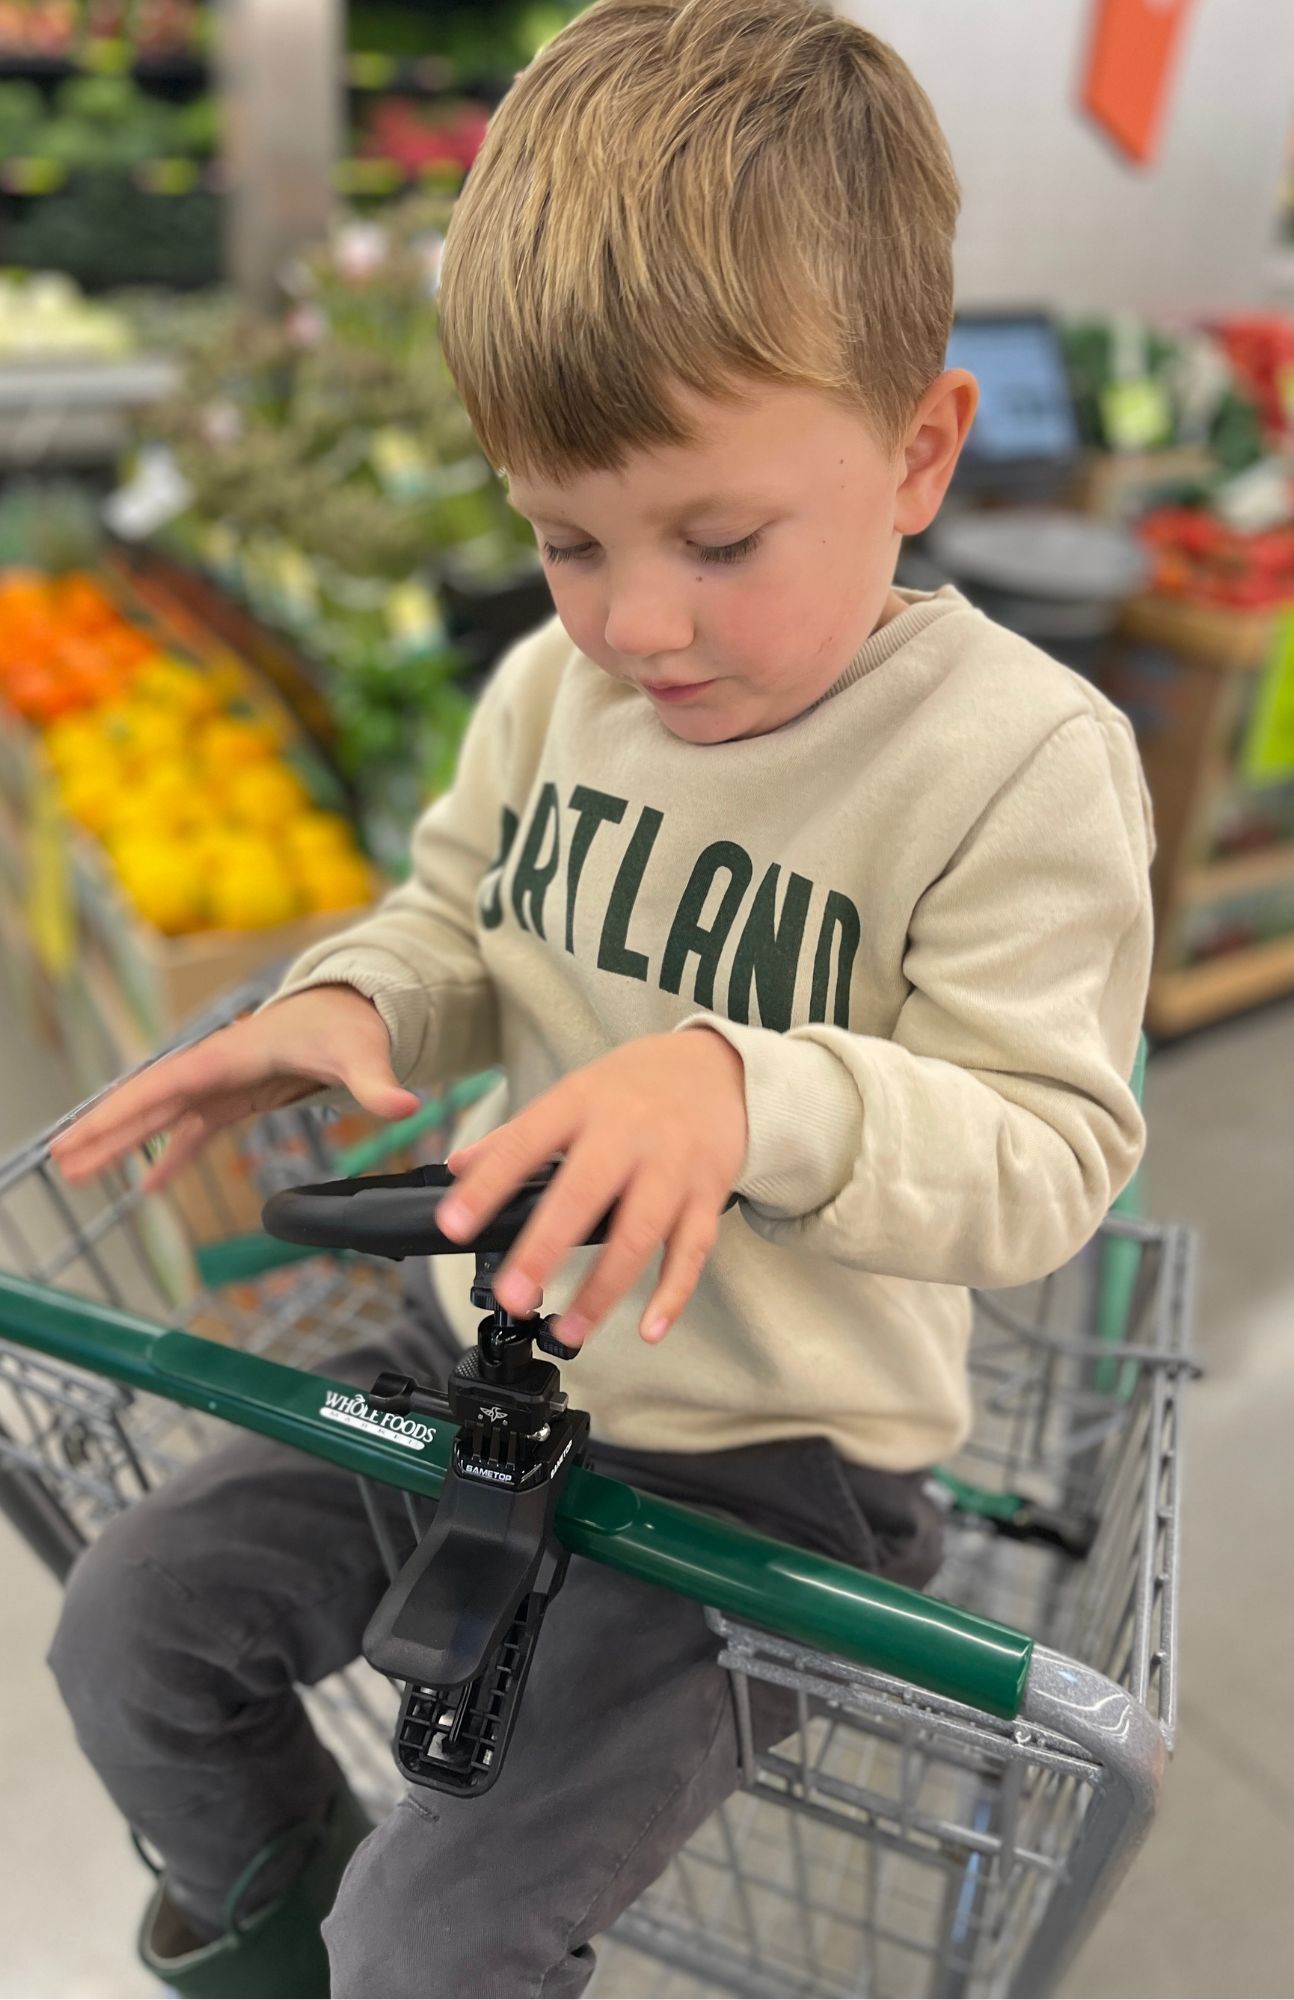 Keeping Kids Safe in the Grocery Cart: A Guide for Parents